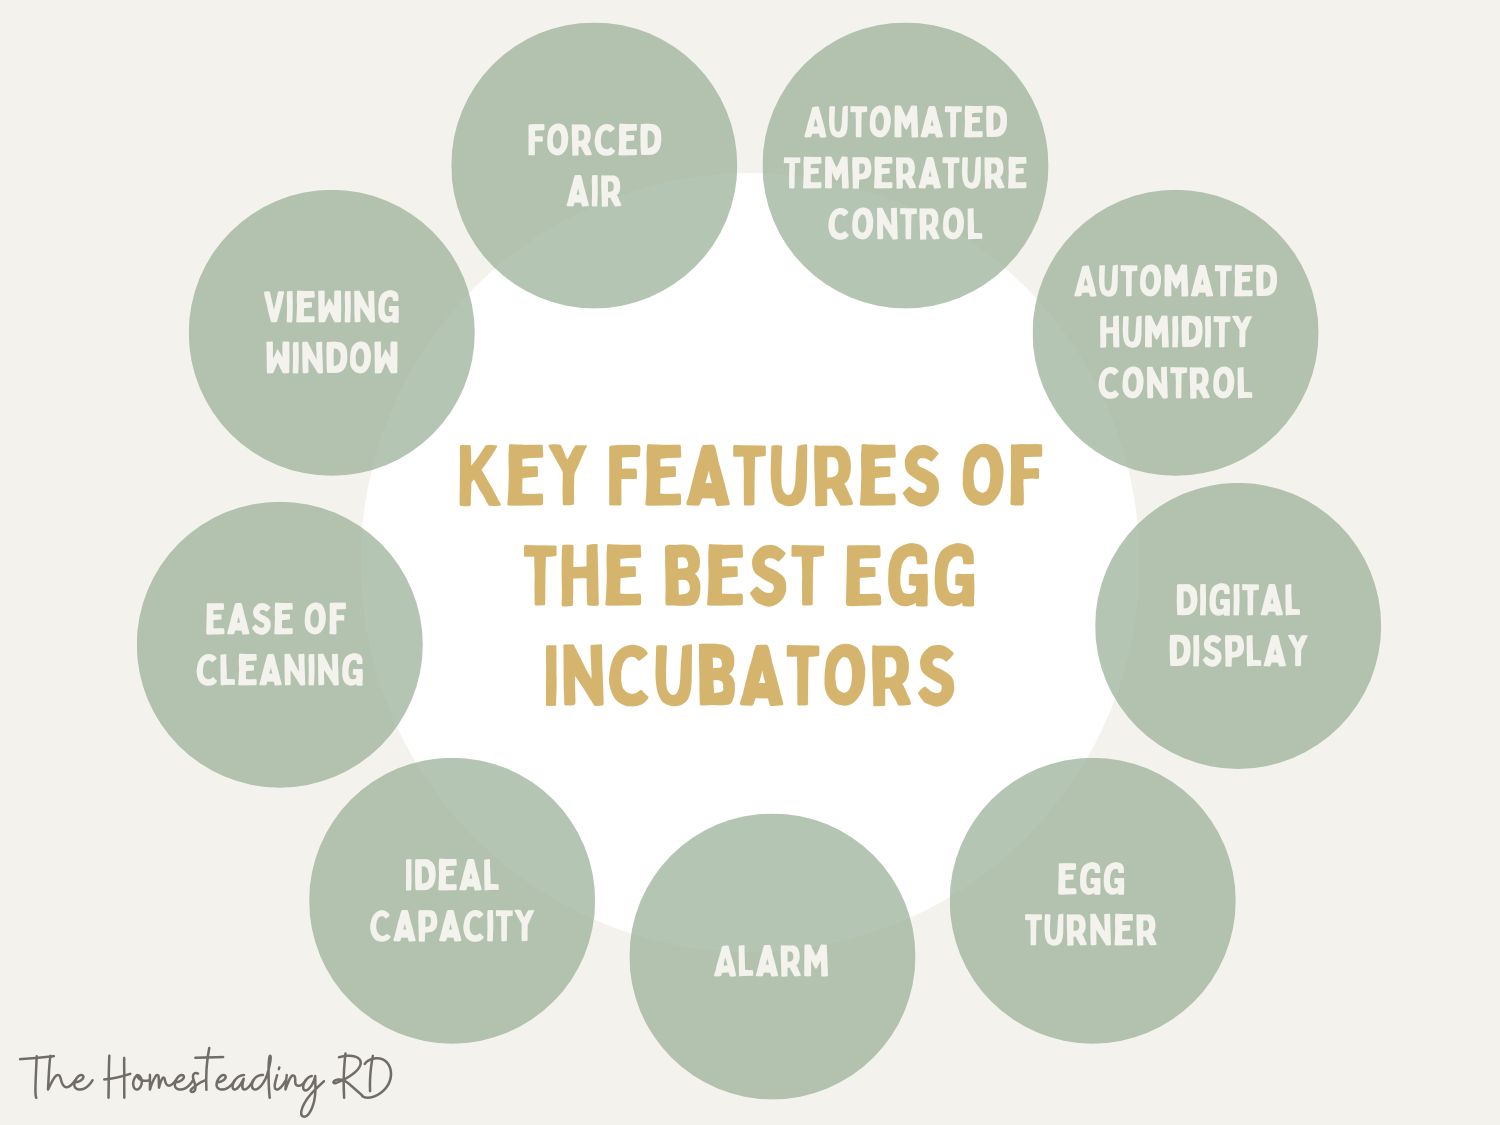 A graphic showing the 9 key features of the best egg incubators